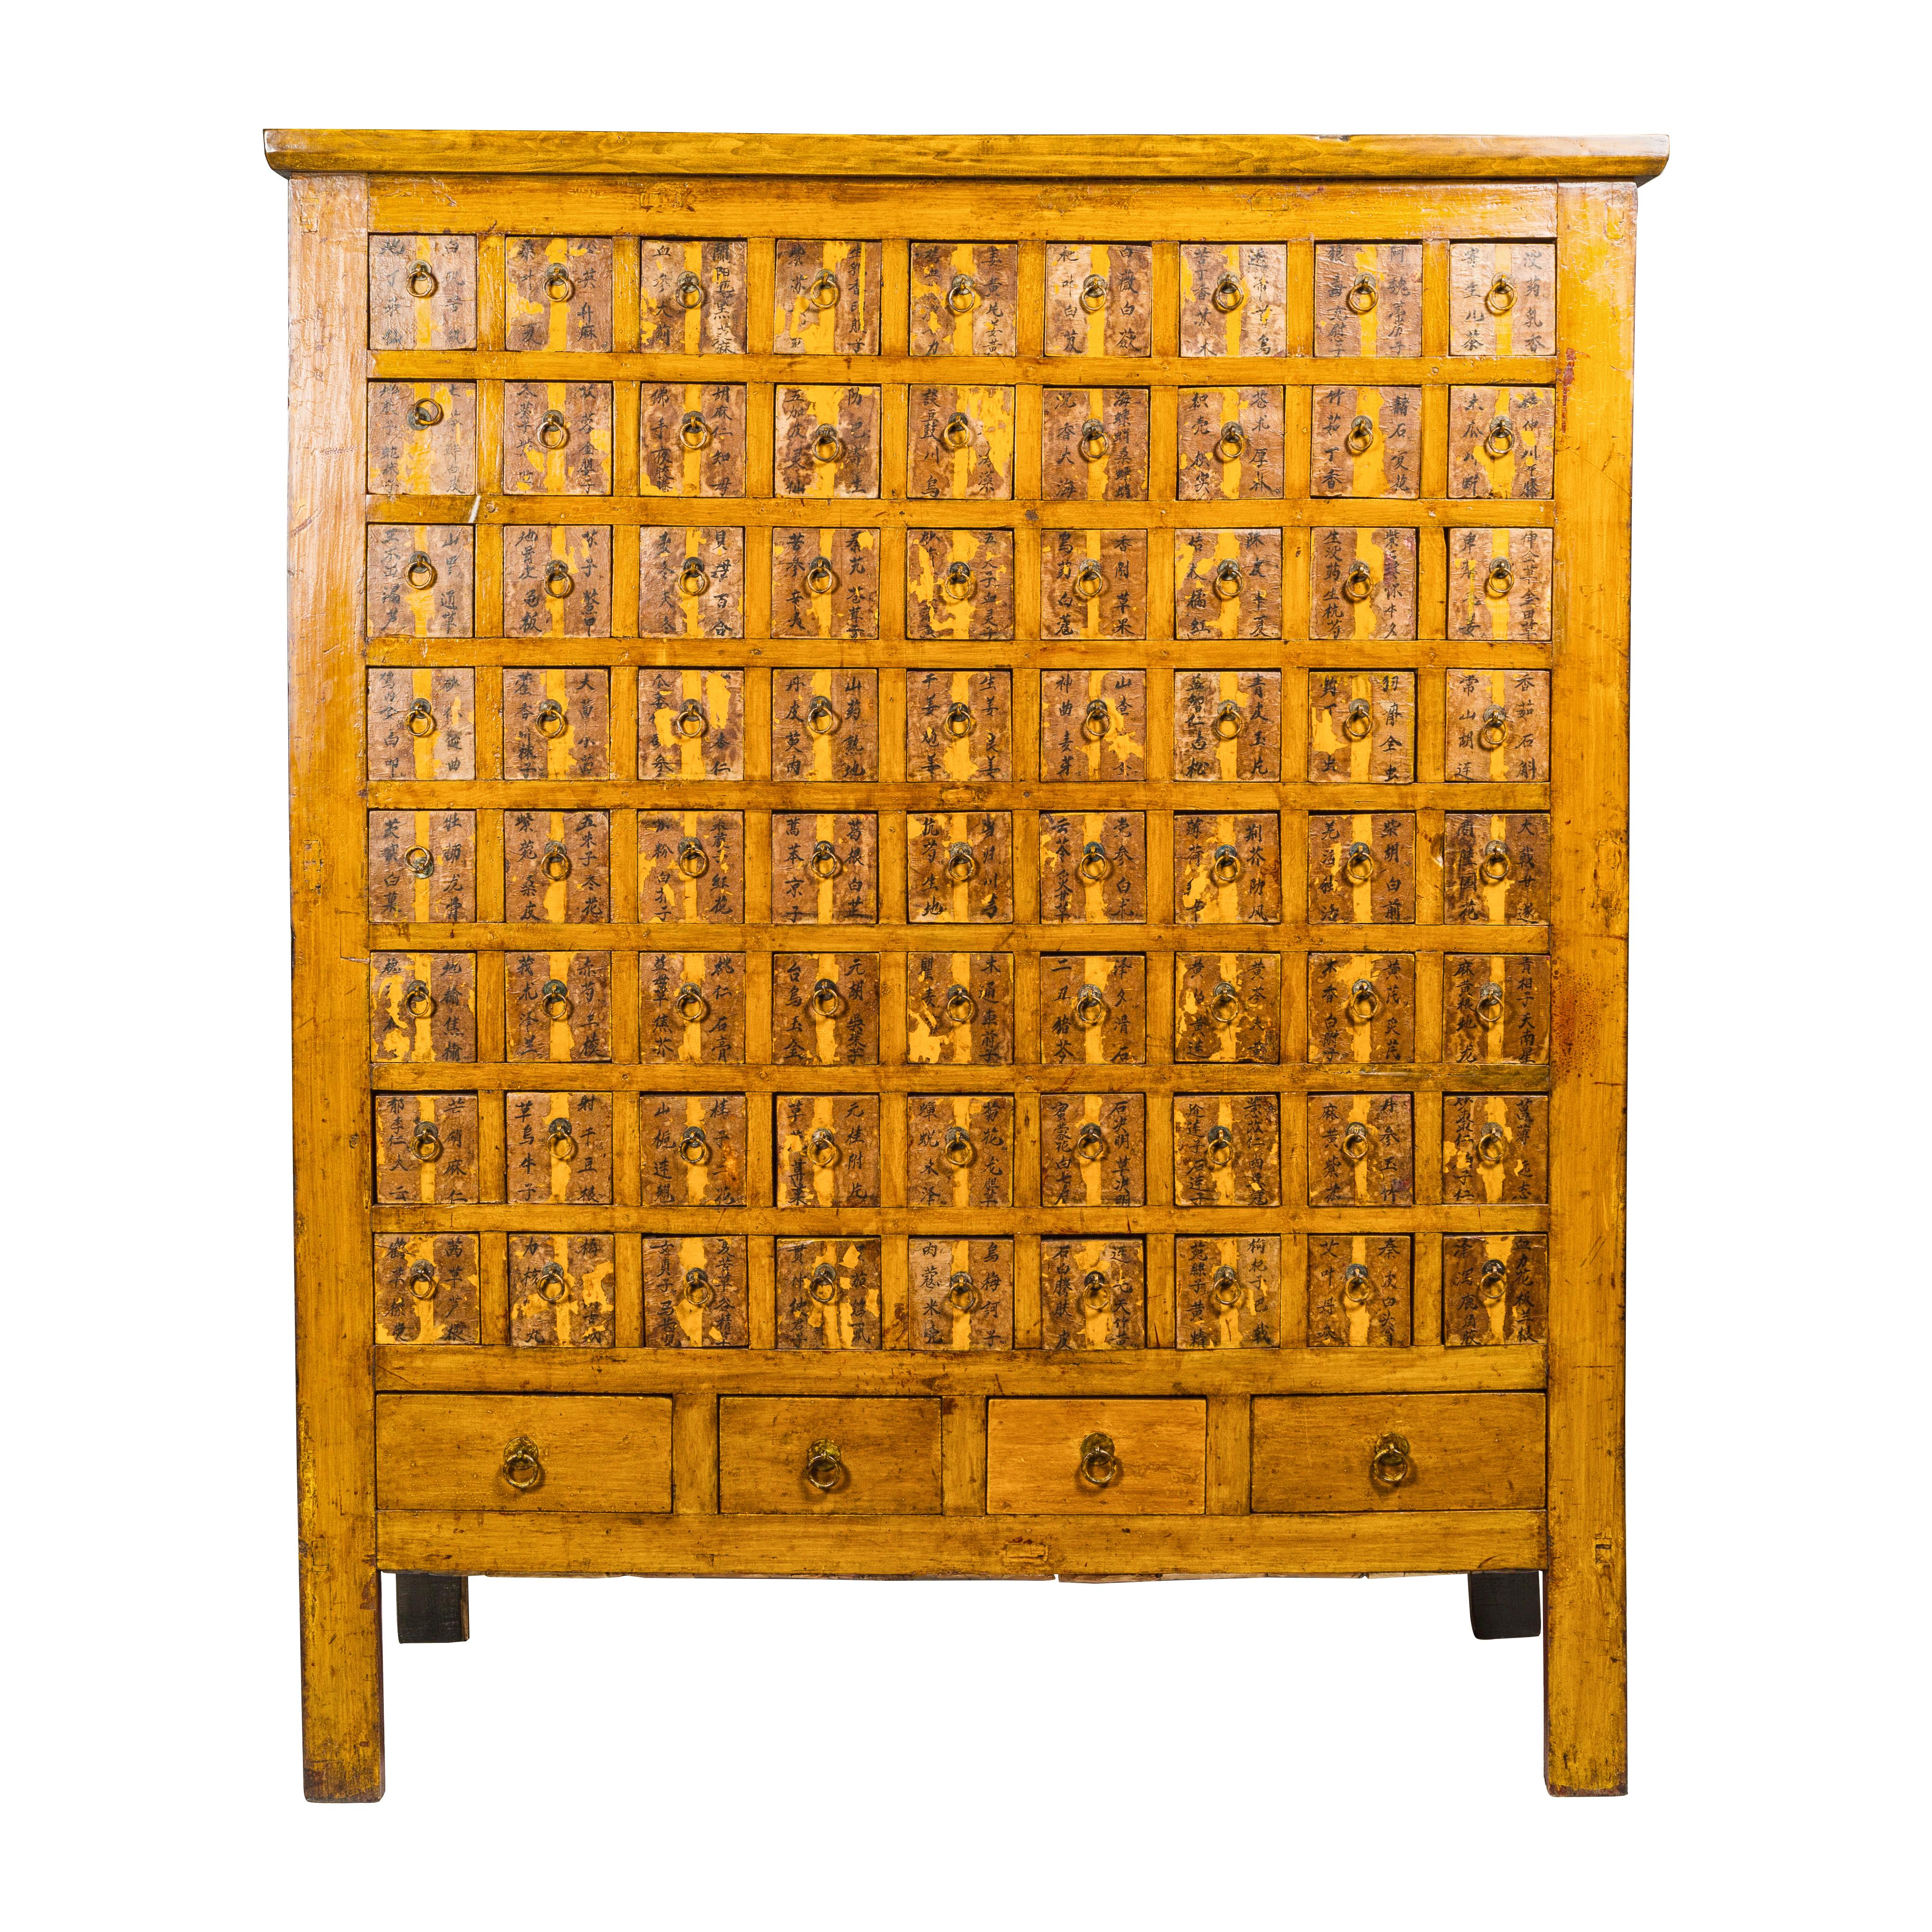 Oversized Qing Apothecary Cabinet with 76 Drawers and Chinese Calligraphy For Sale 12